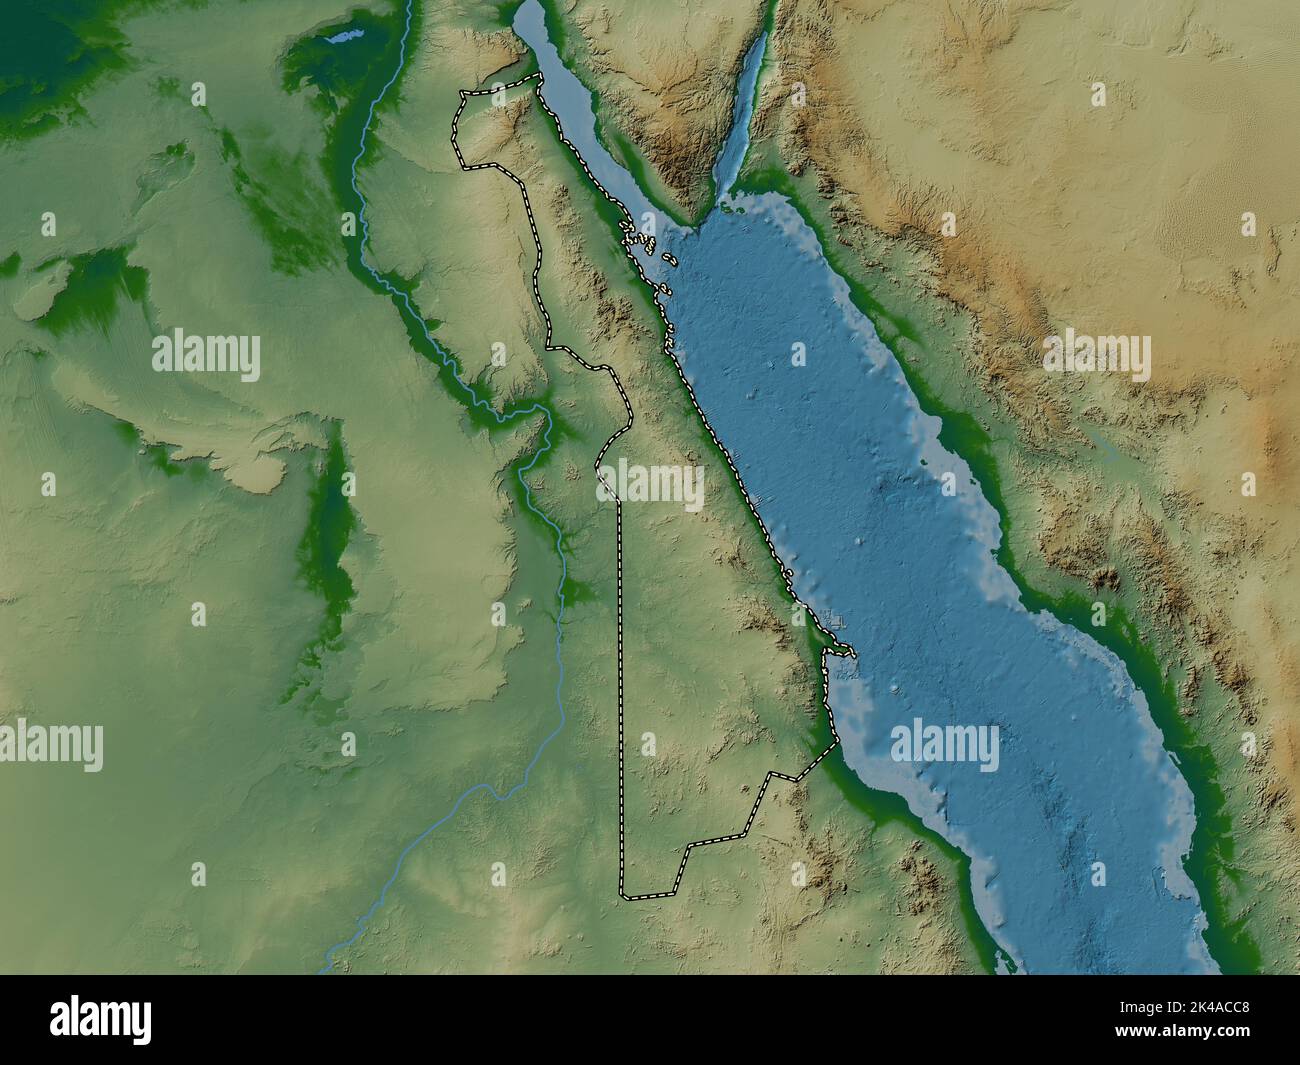 Al Bahr al Ahmar, governorate of Egypt. Colored elevation map with lakes and rivers Stock Photo